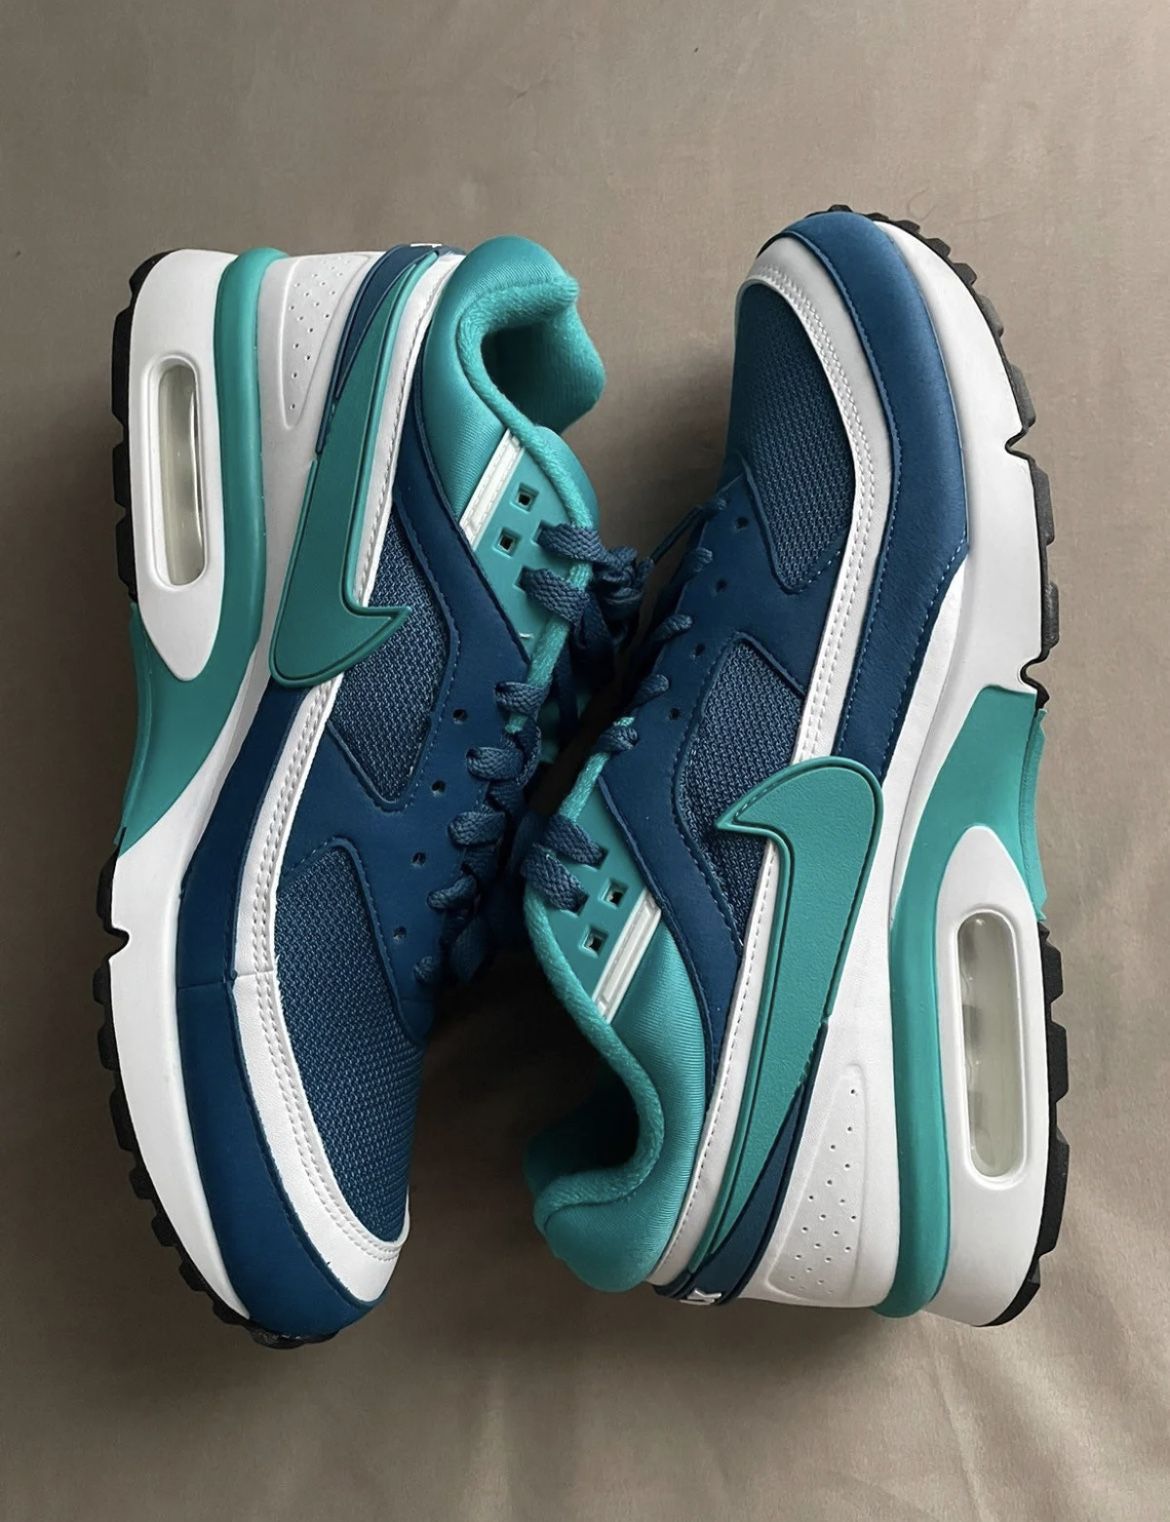 Nike Air Max BW OG “Marina” Size 9.5 Men's for Los Angeles, CA - OfferUp